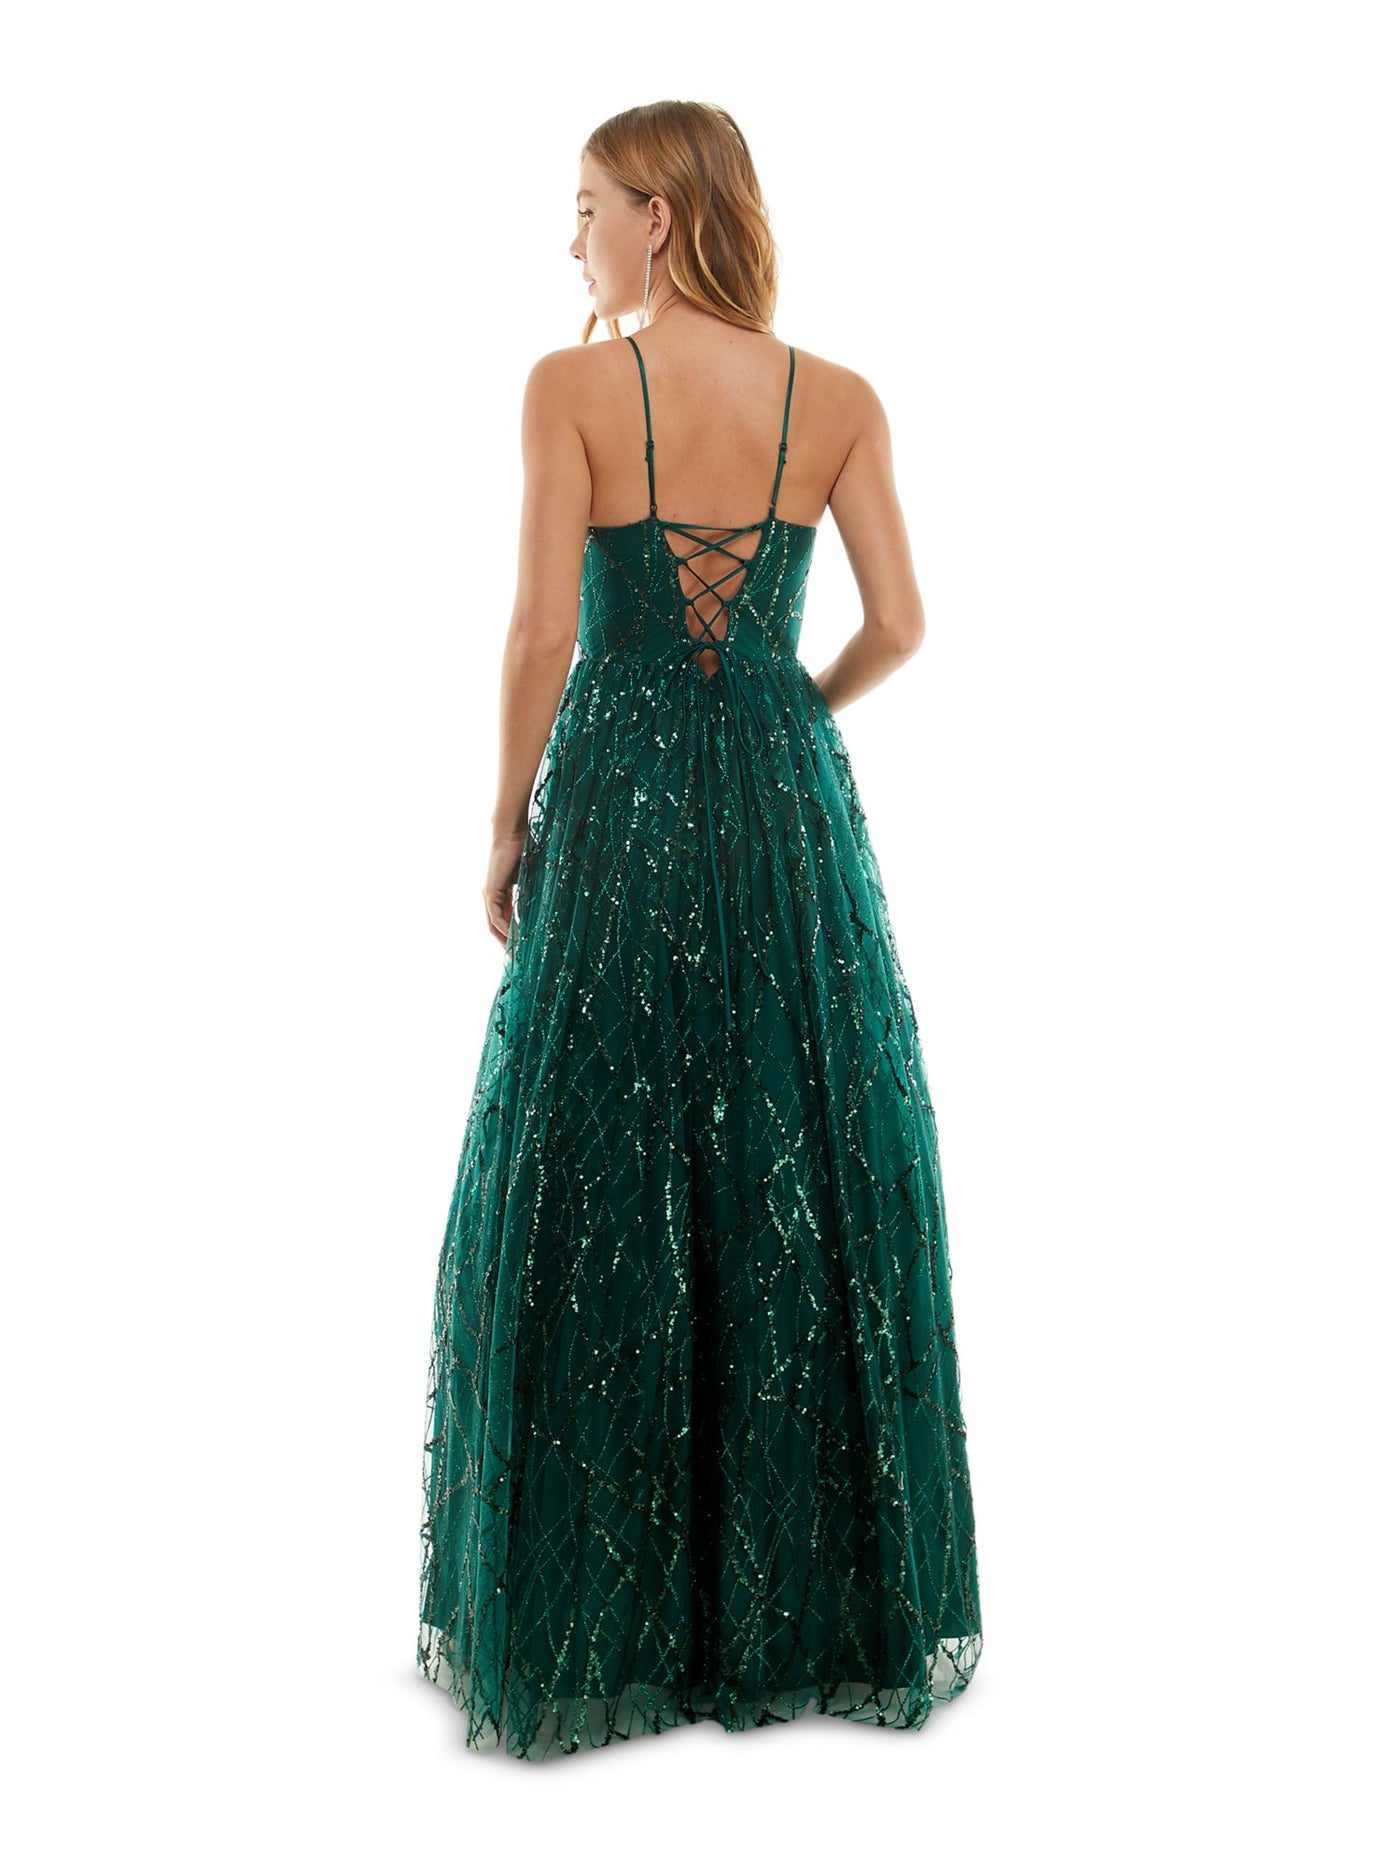 SAY YES TO THE PROM Womens Green Zippered Sequined Glitter Tulle Mesh Spaghetti Strap V Neck Full-Length Formal Gown Dress Juniors 3